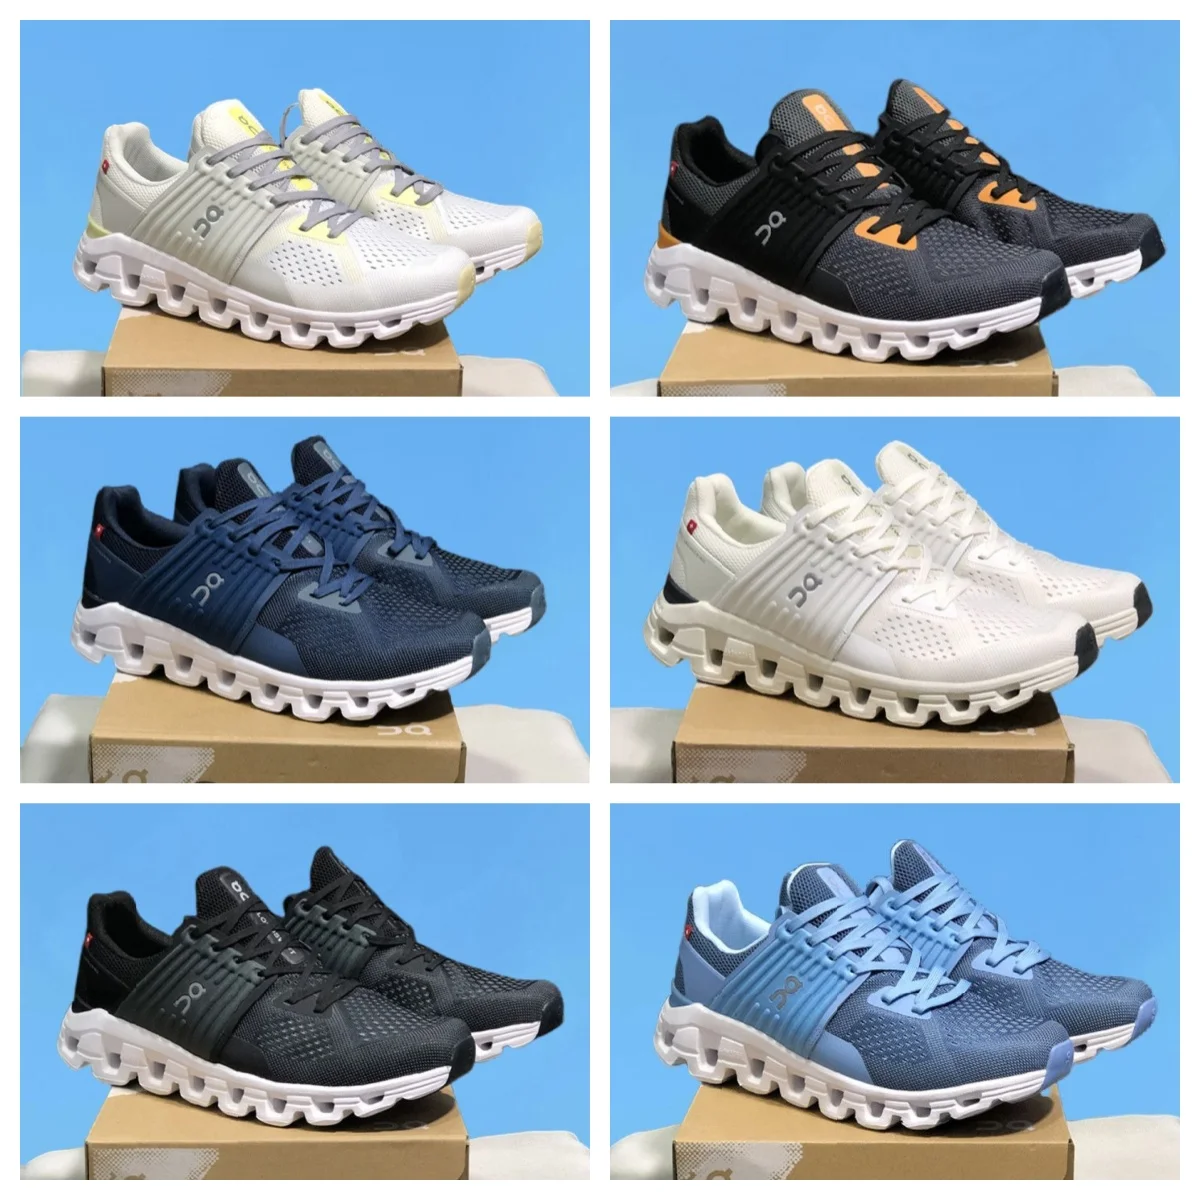 

Original on Cloud X cloudswift Men Women Running Shoes Unisex Breathable Outdoor Sports Runner Sneakers Comfortable Casual Shoes